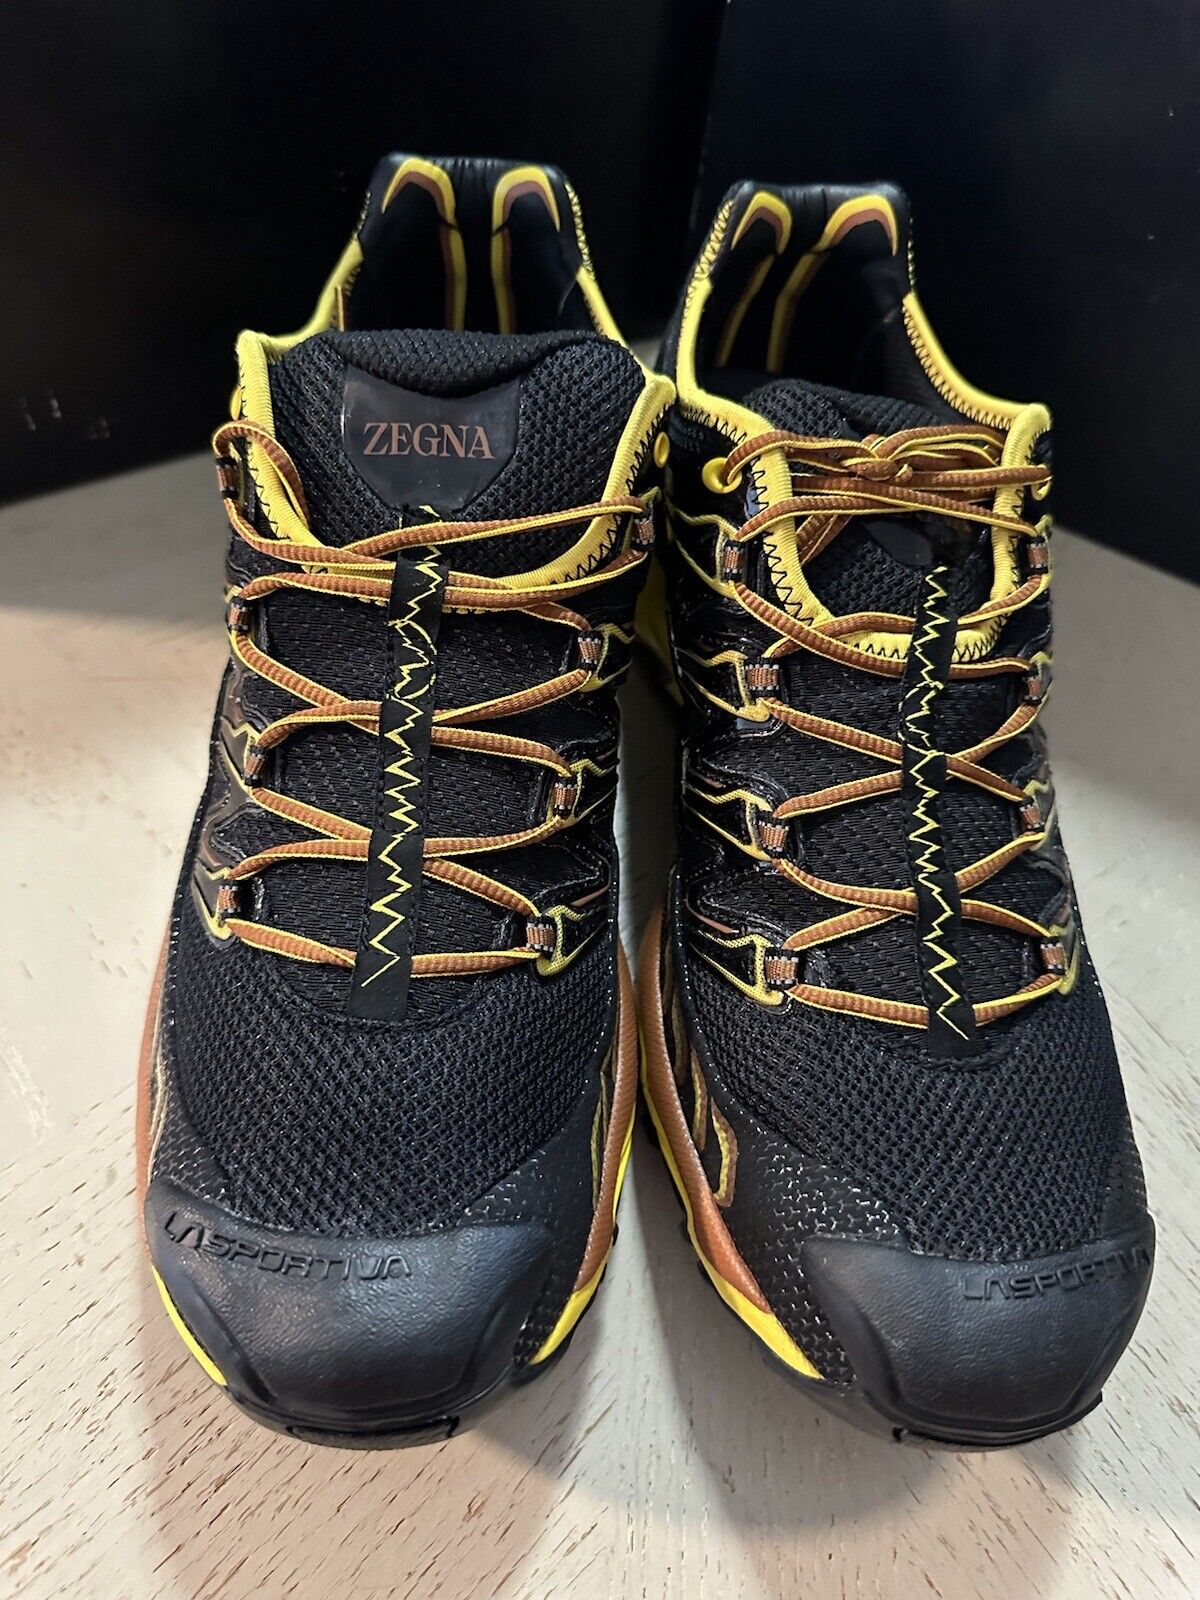 New Zegna Men Sneakers Shoes Black/Yellow/Brown 9 US